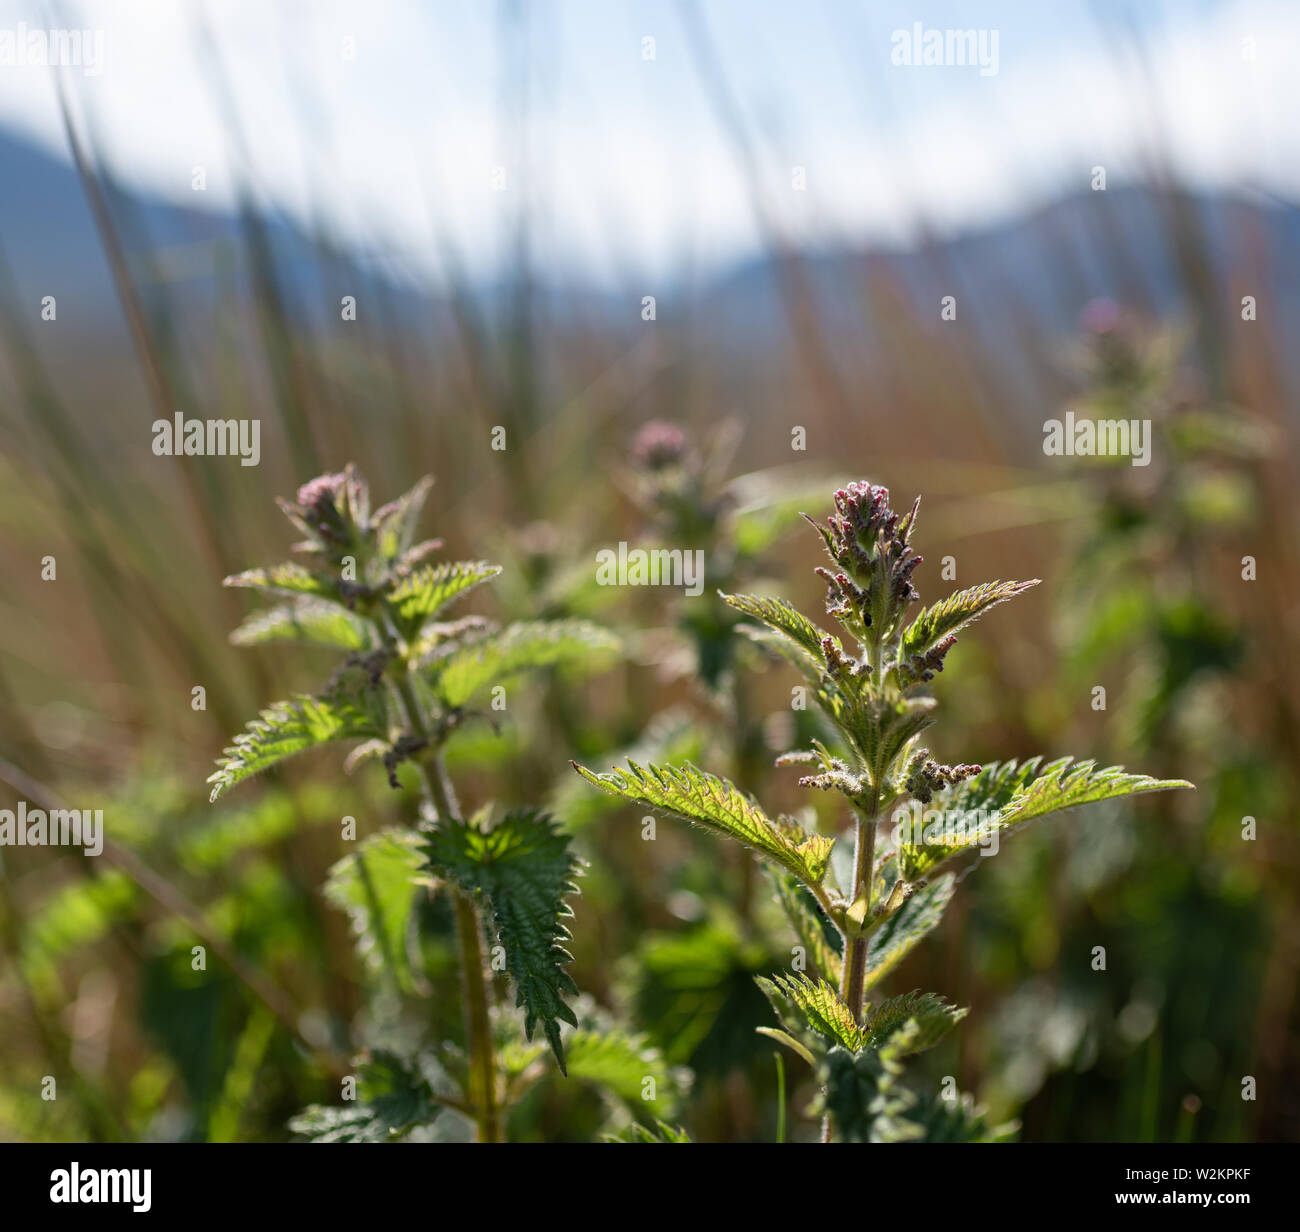 Stinging nettle plant in flower, sunlit, mountains on the background Stock Photo